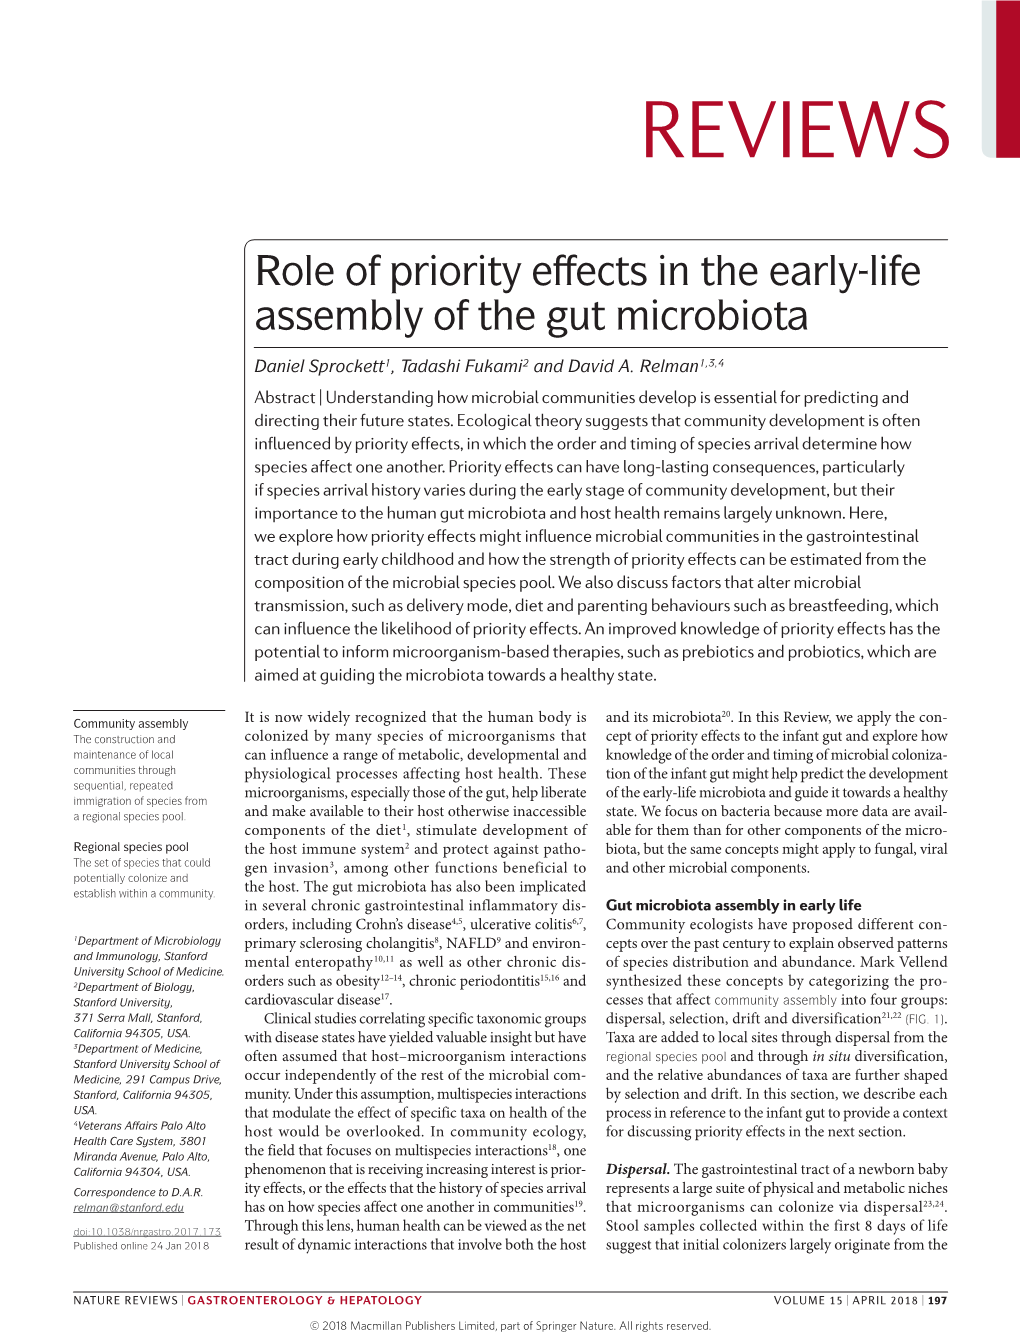 Role of Priority Effects in the Early-Life Assembly of the Gut Microbiota